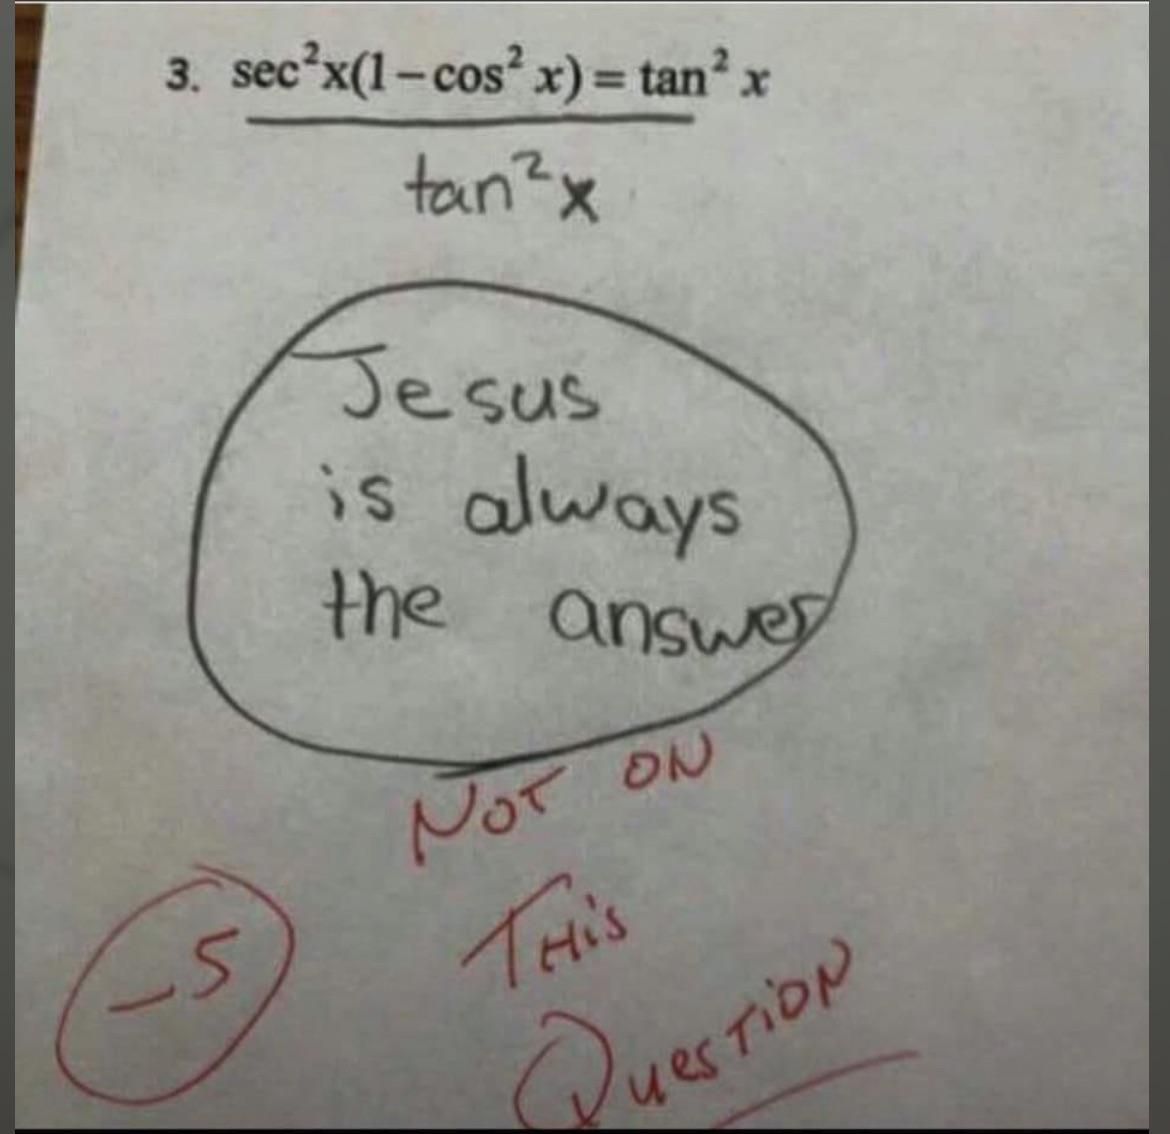 Jesus is not always the answer